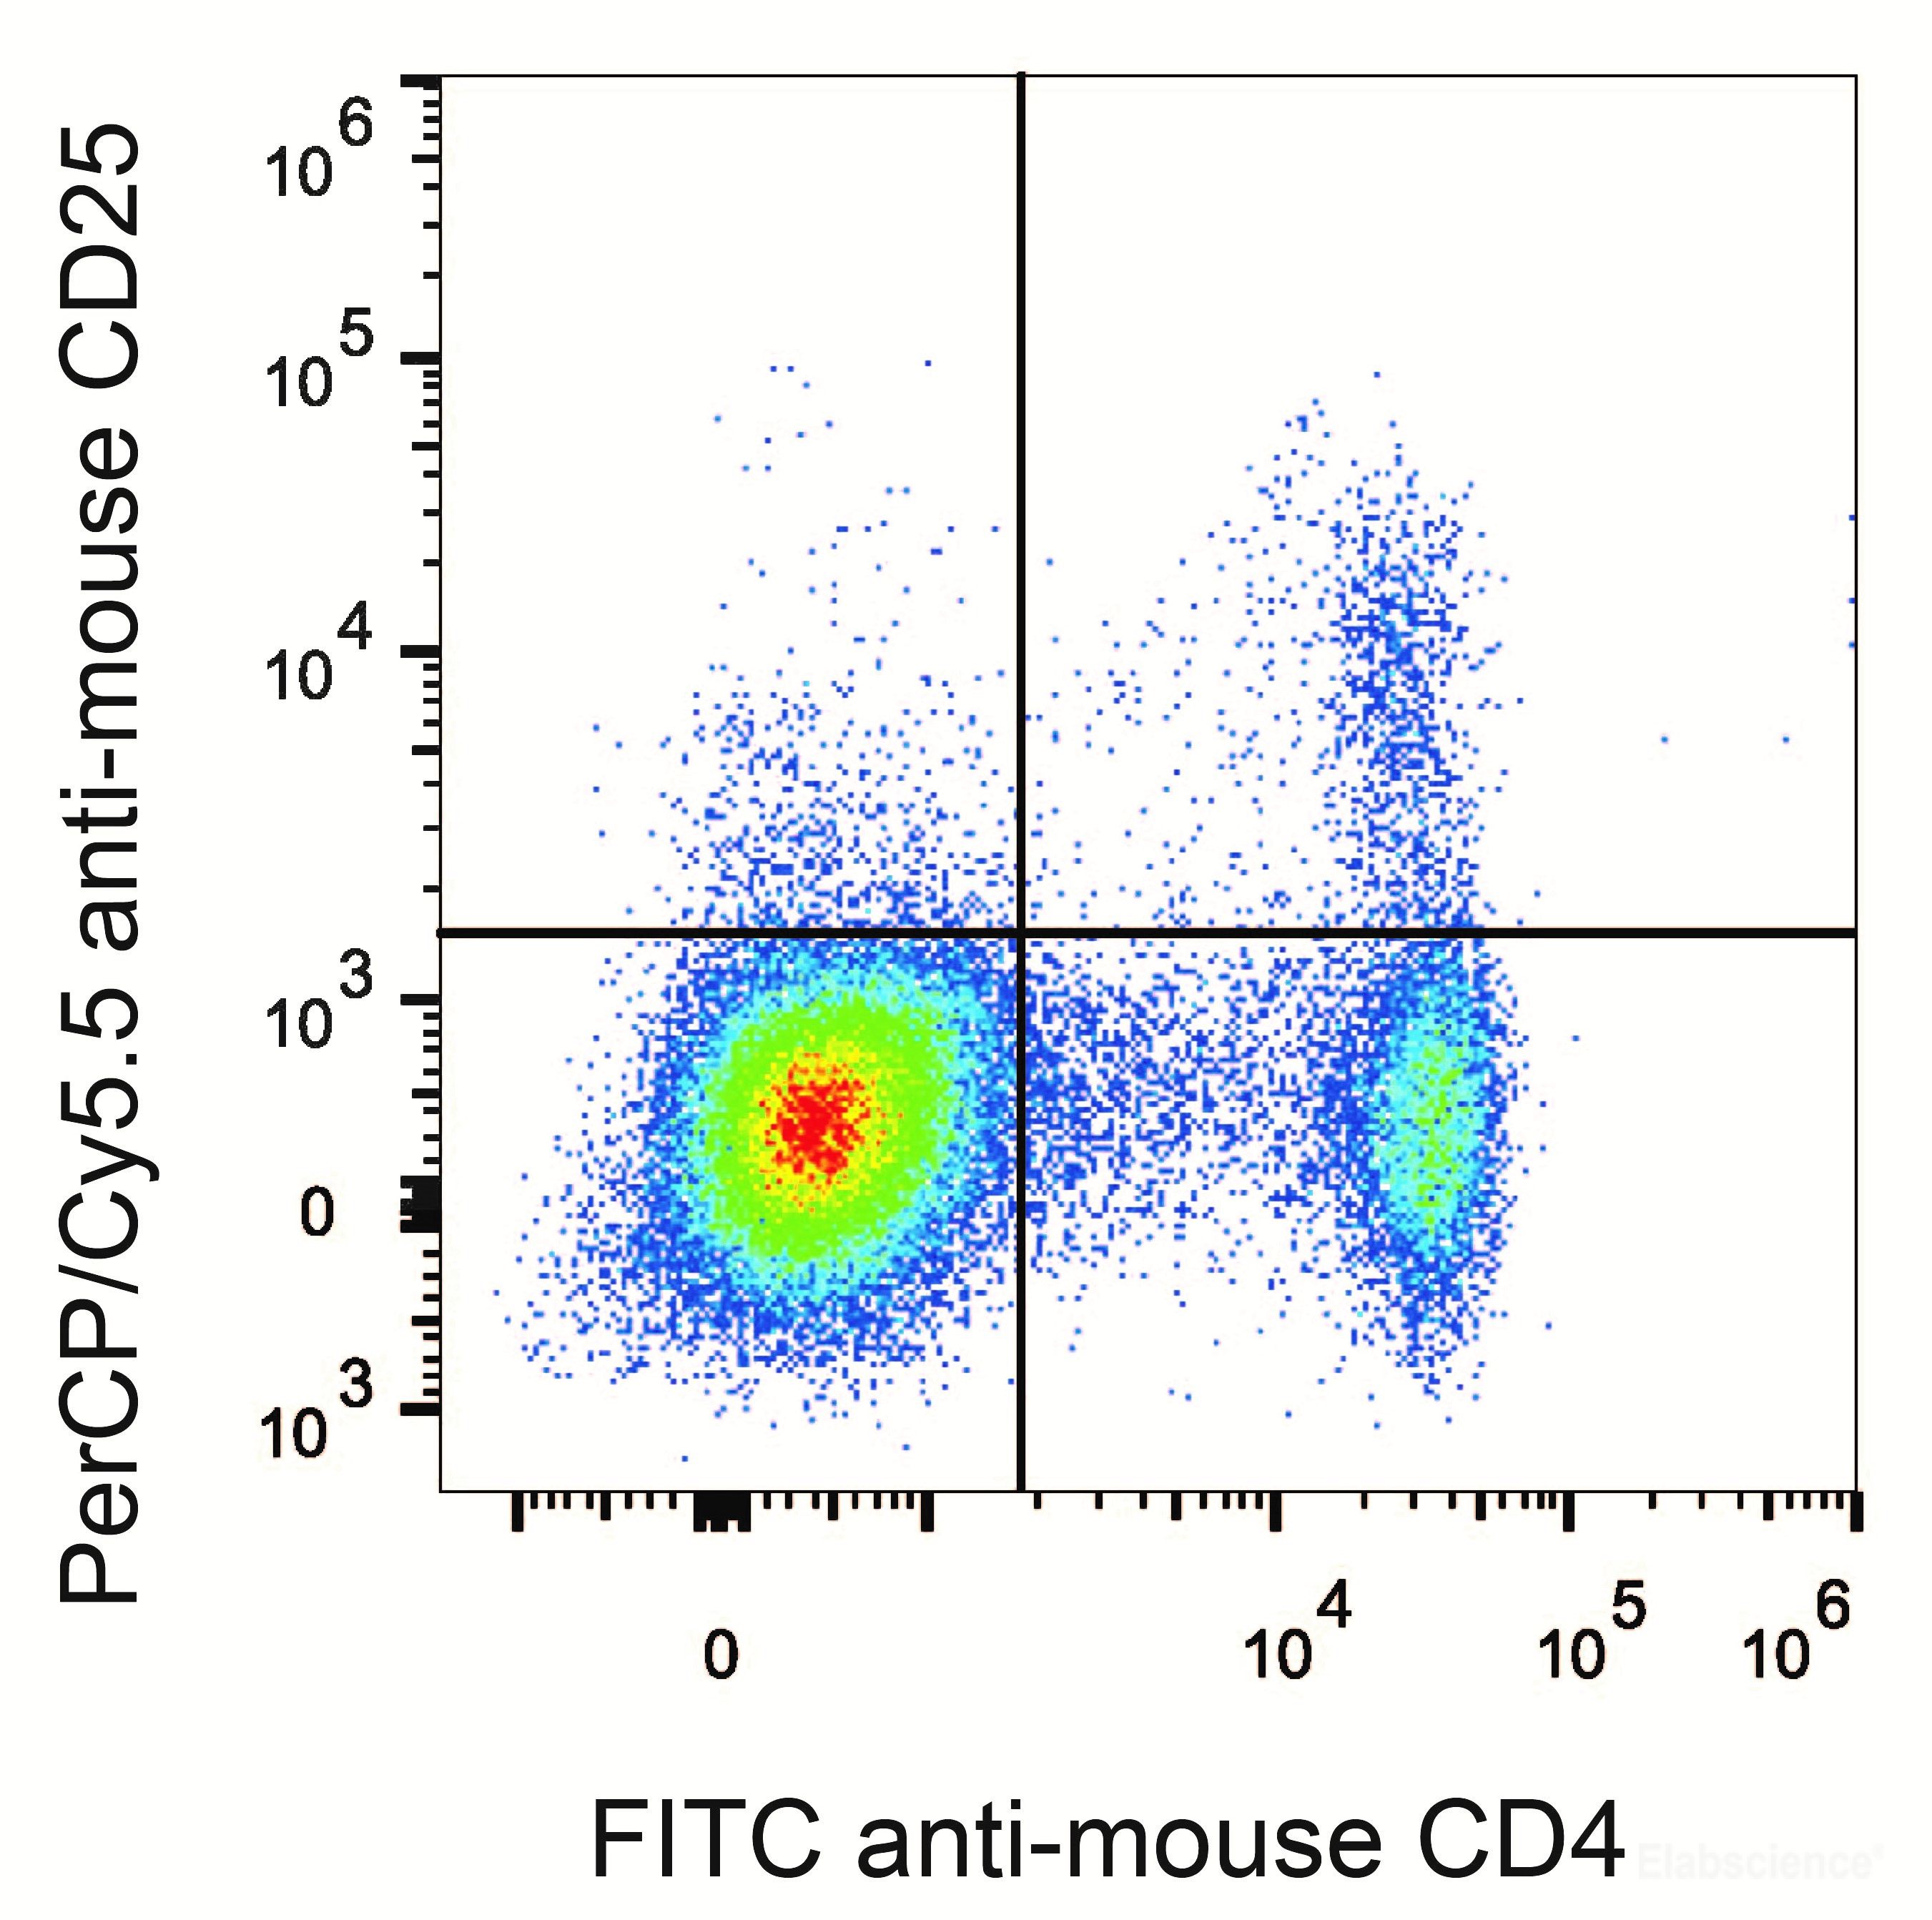 C57BL/6 murine splenocytes are stained with PerCP/Cyanine5.5 Anti-Mouse CD25 Antibody and FITC Anti-Mouse CD4 Antibody Antibody.